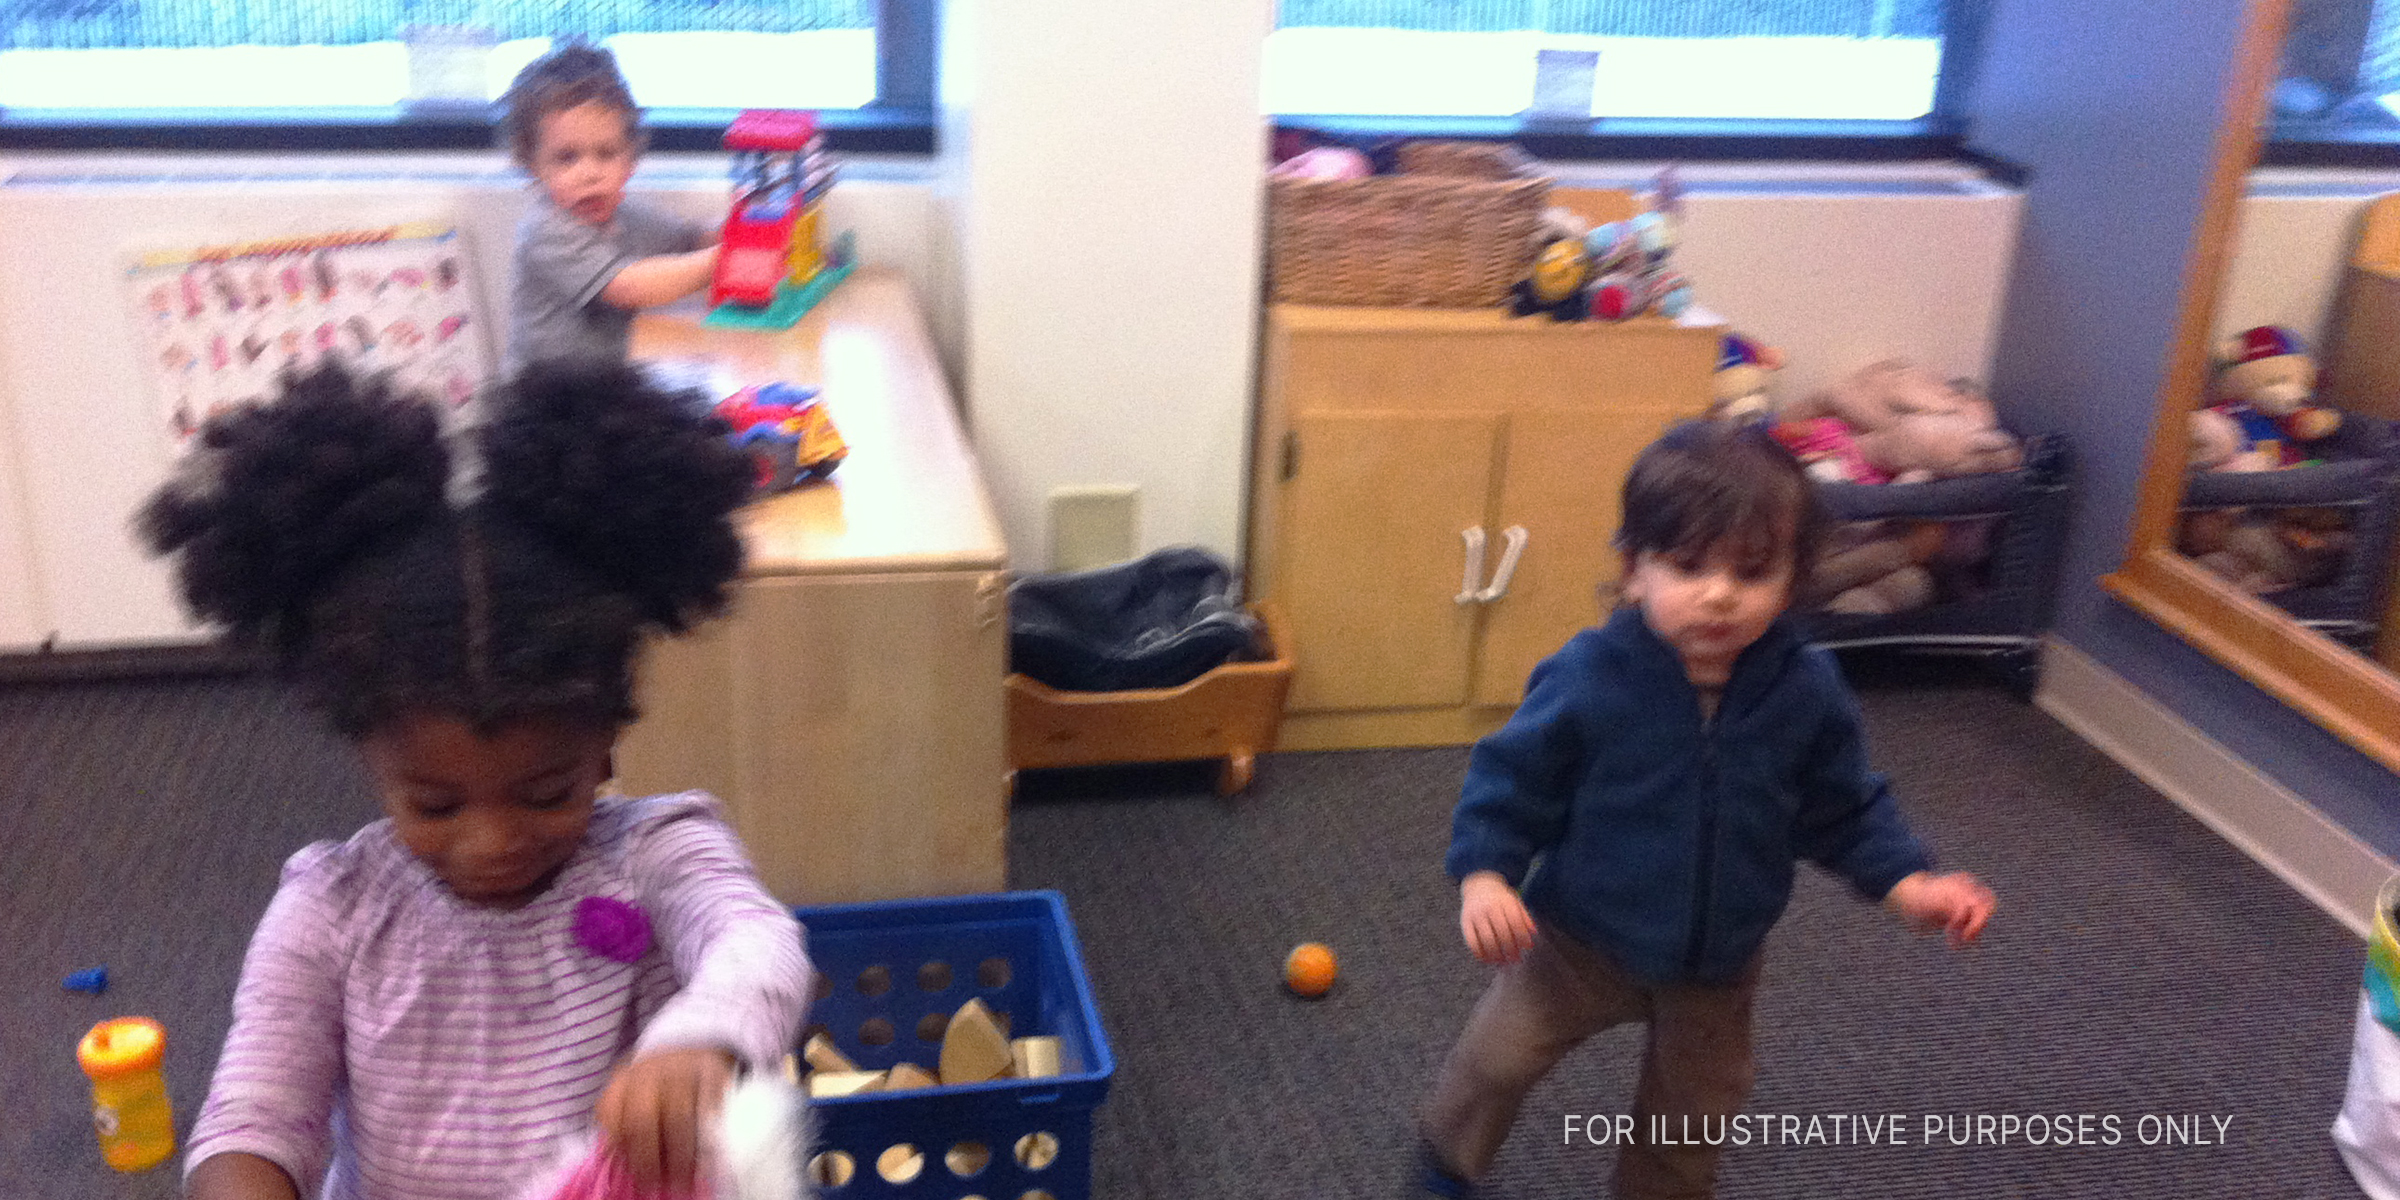 Young children playing in daycare center | Source: Flickr / (CC BY 2.0) by mazaletel